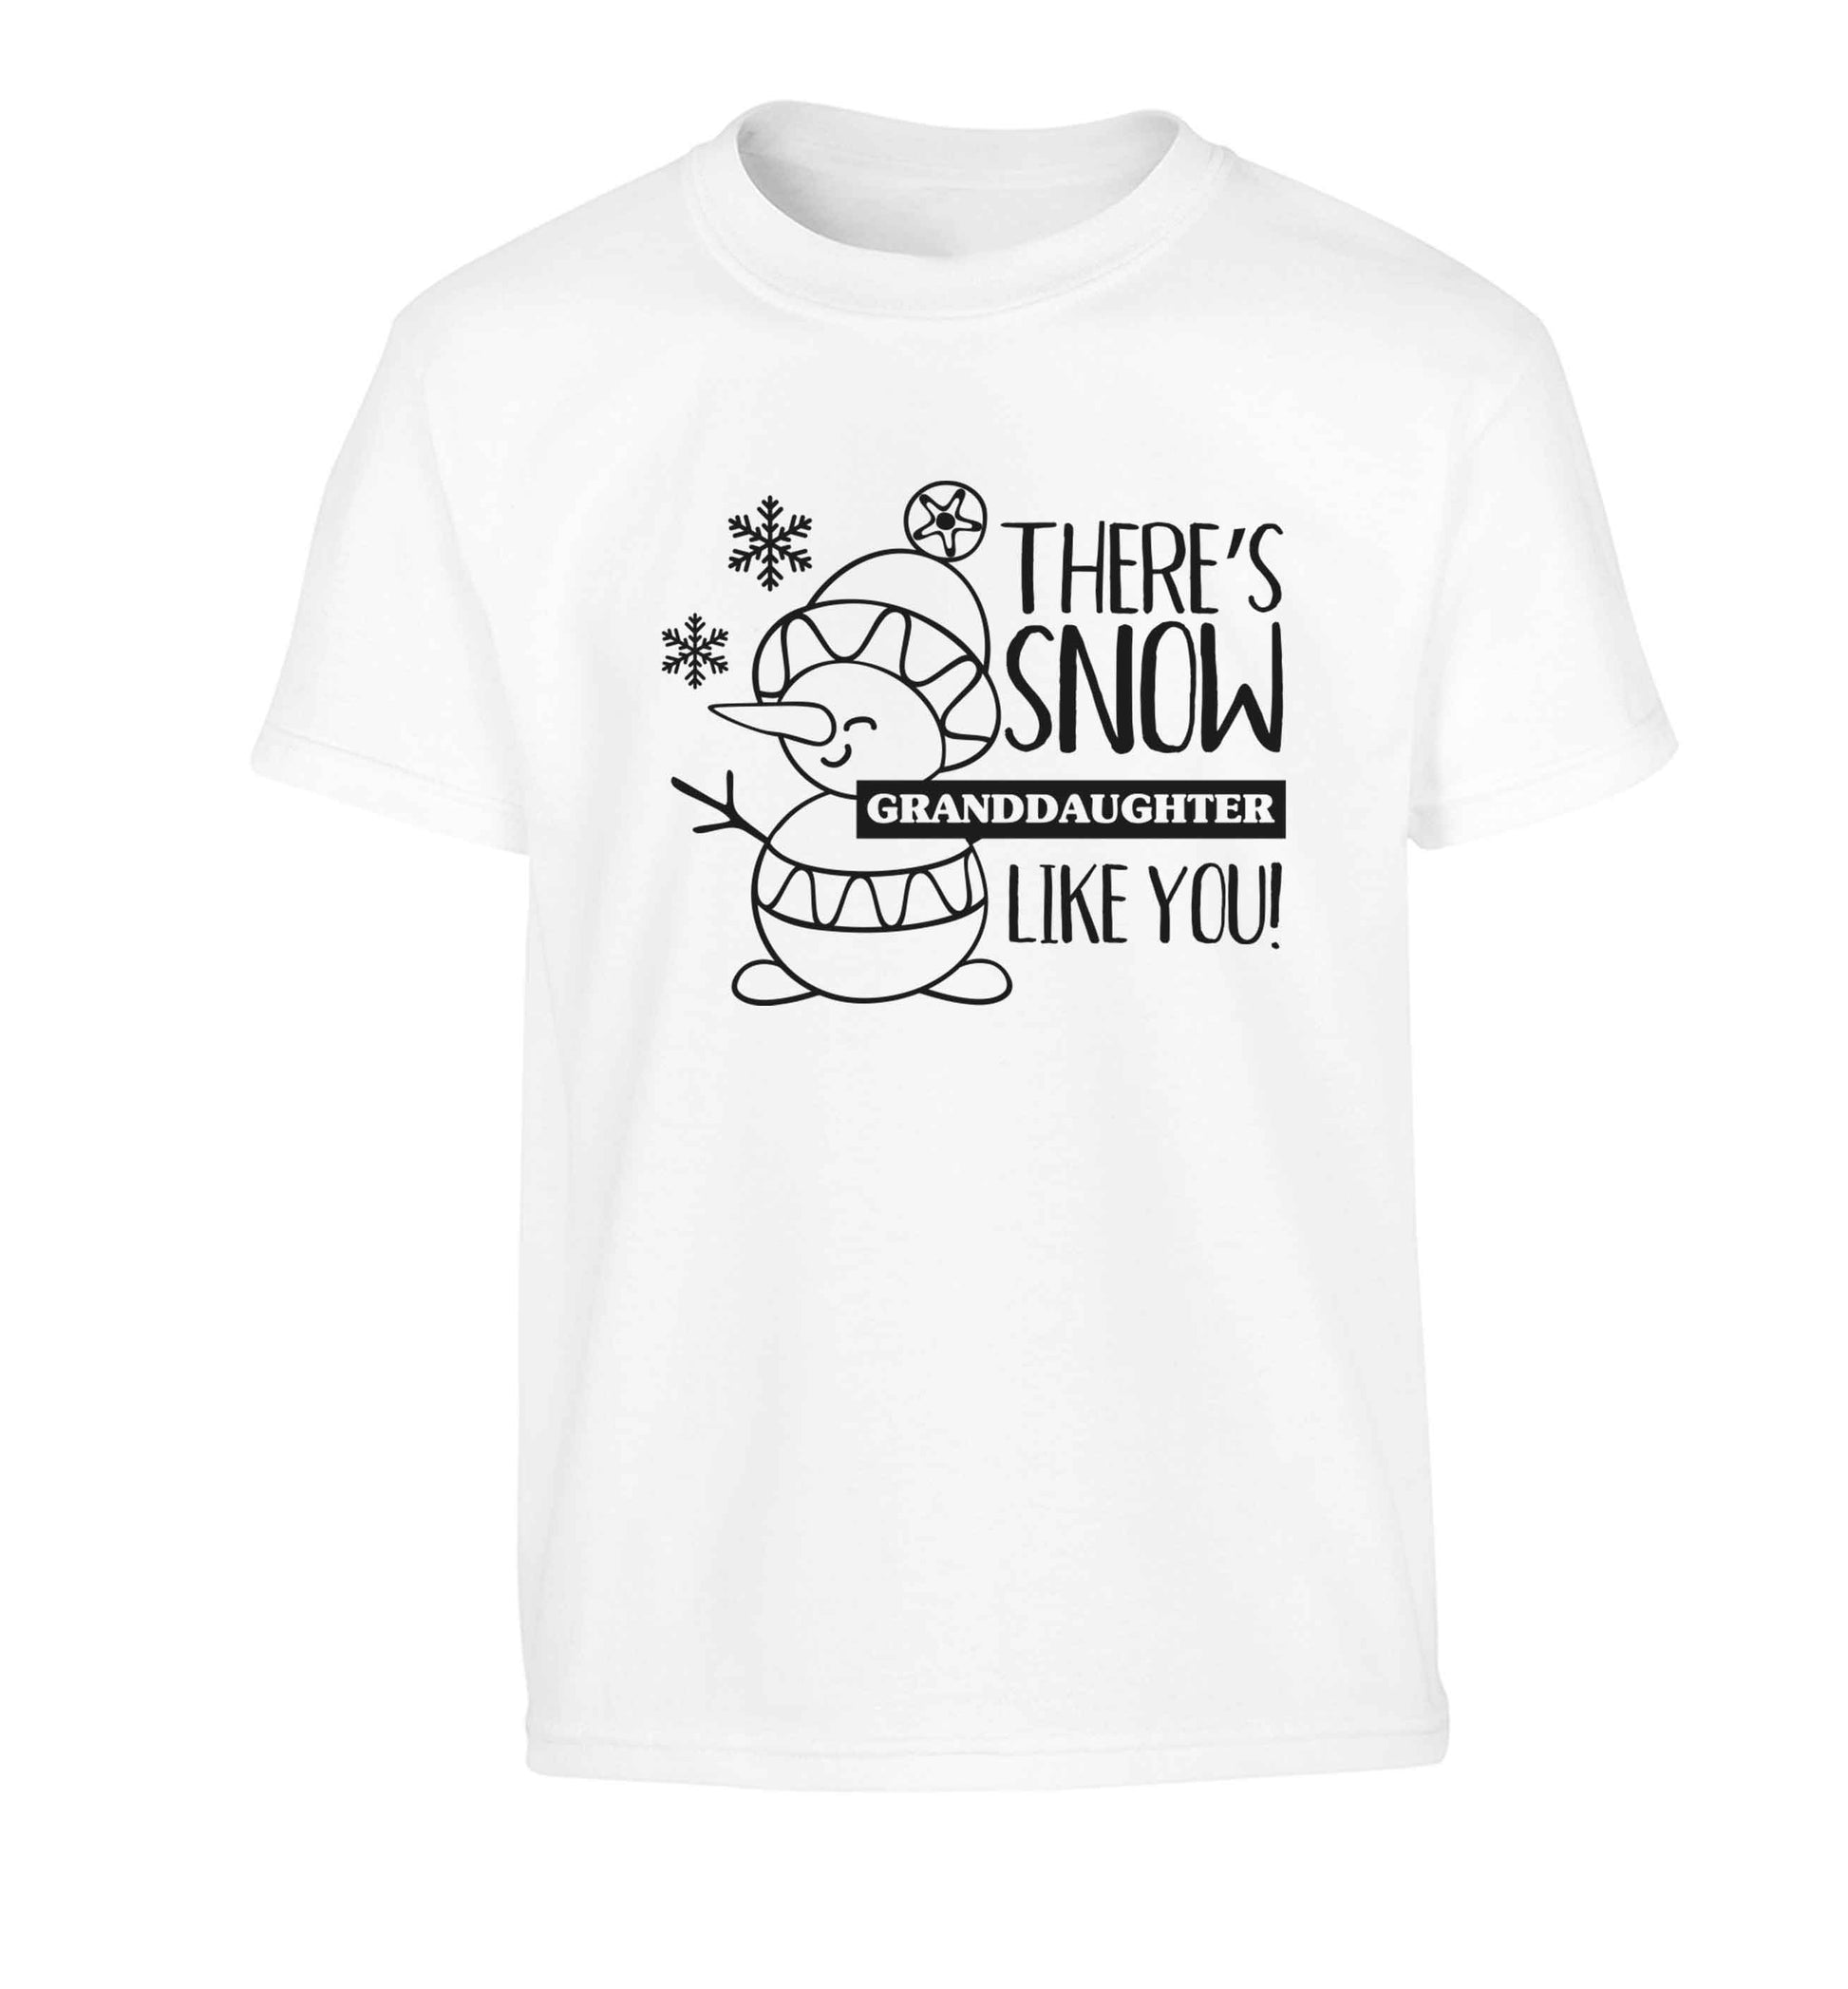 There's snow granddaughter like you Children's white Tshirt 12-13 Years